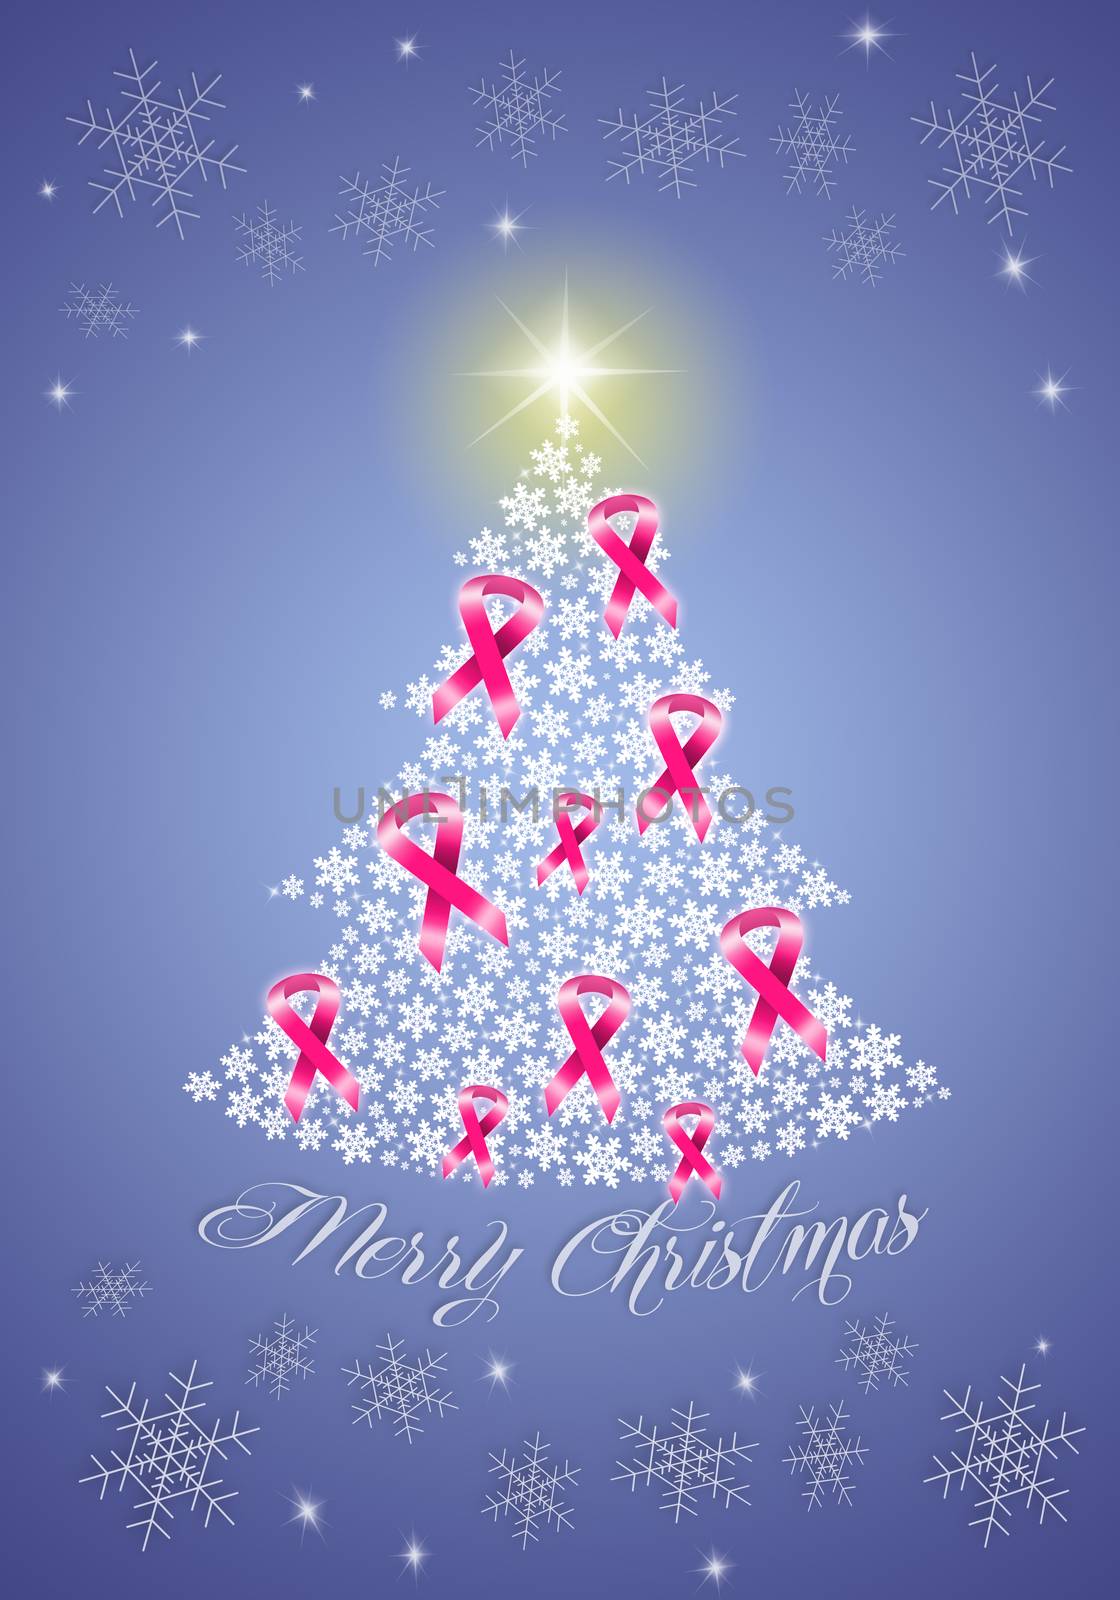 illustration of Christmas tree with pink ribbons